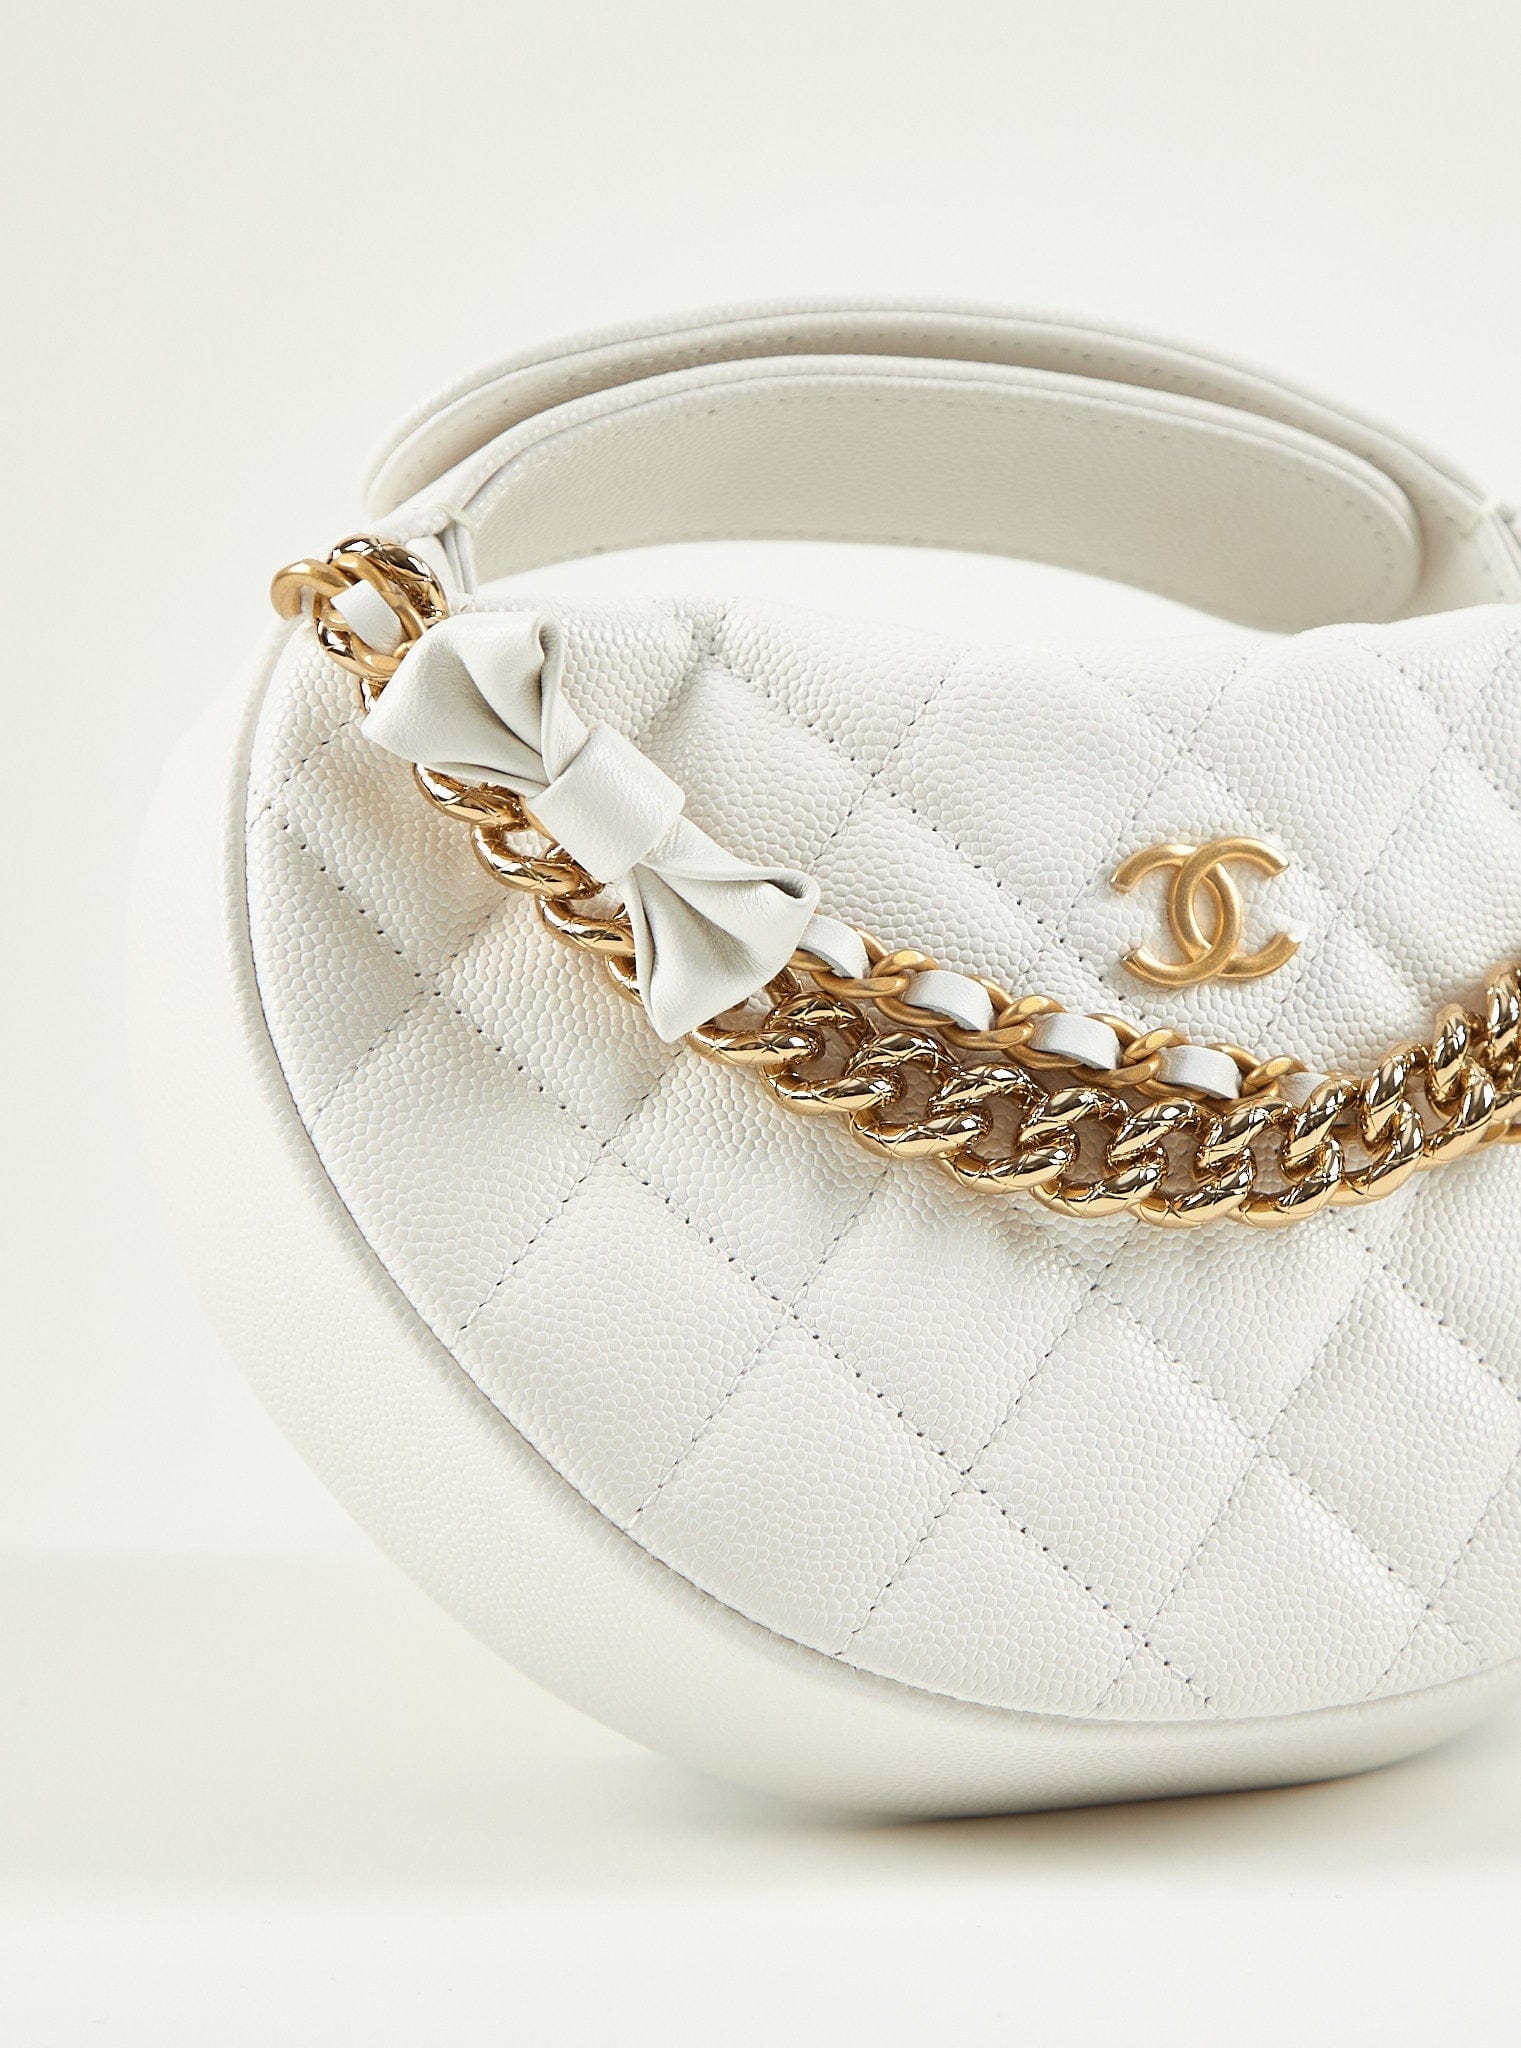 Chanel CHANEL MINI LOOP CHANGE PURSE WITH CHAINS WHITE Caviar Leather with Gold-Tone Hardware